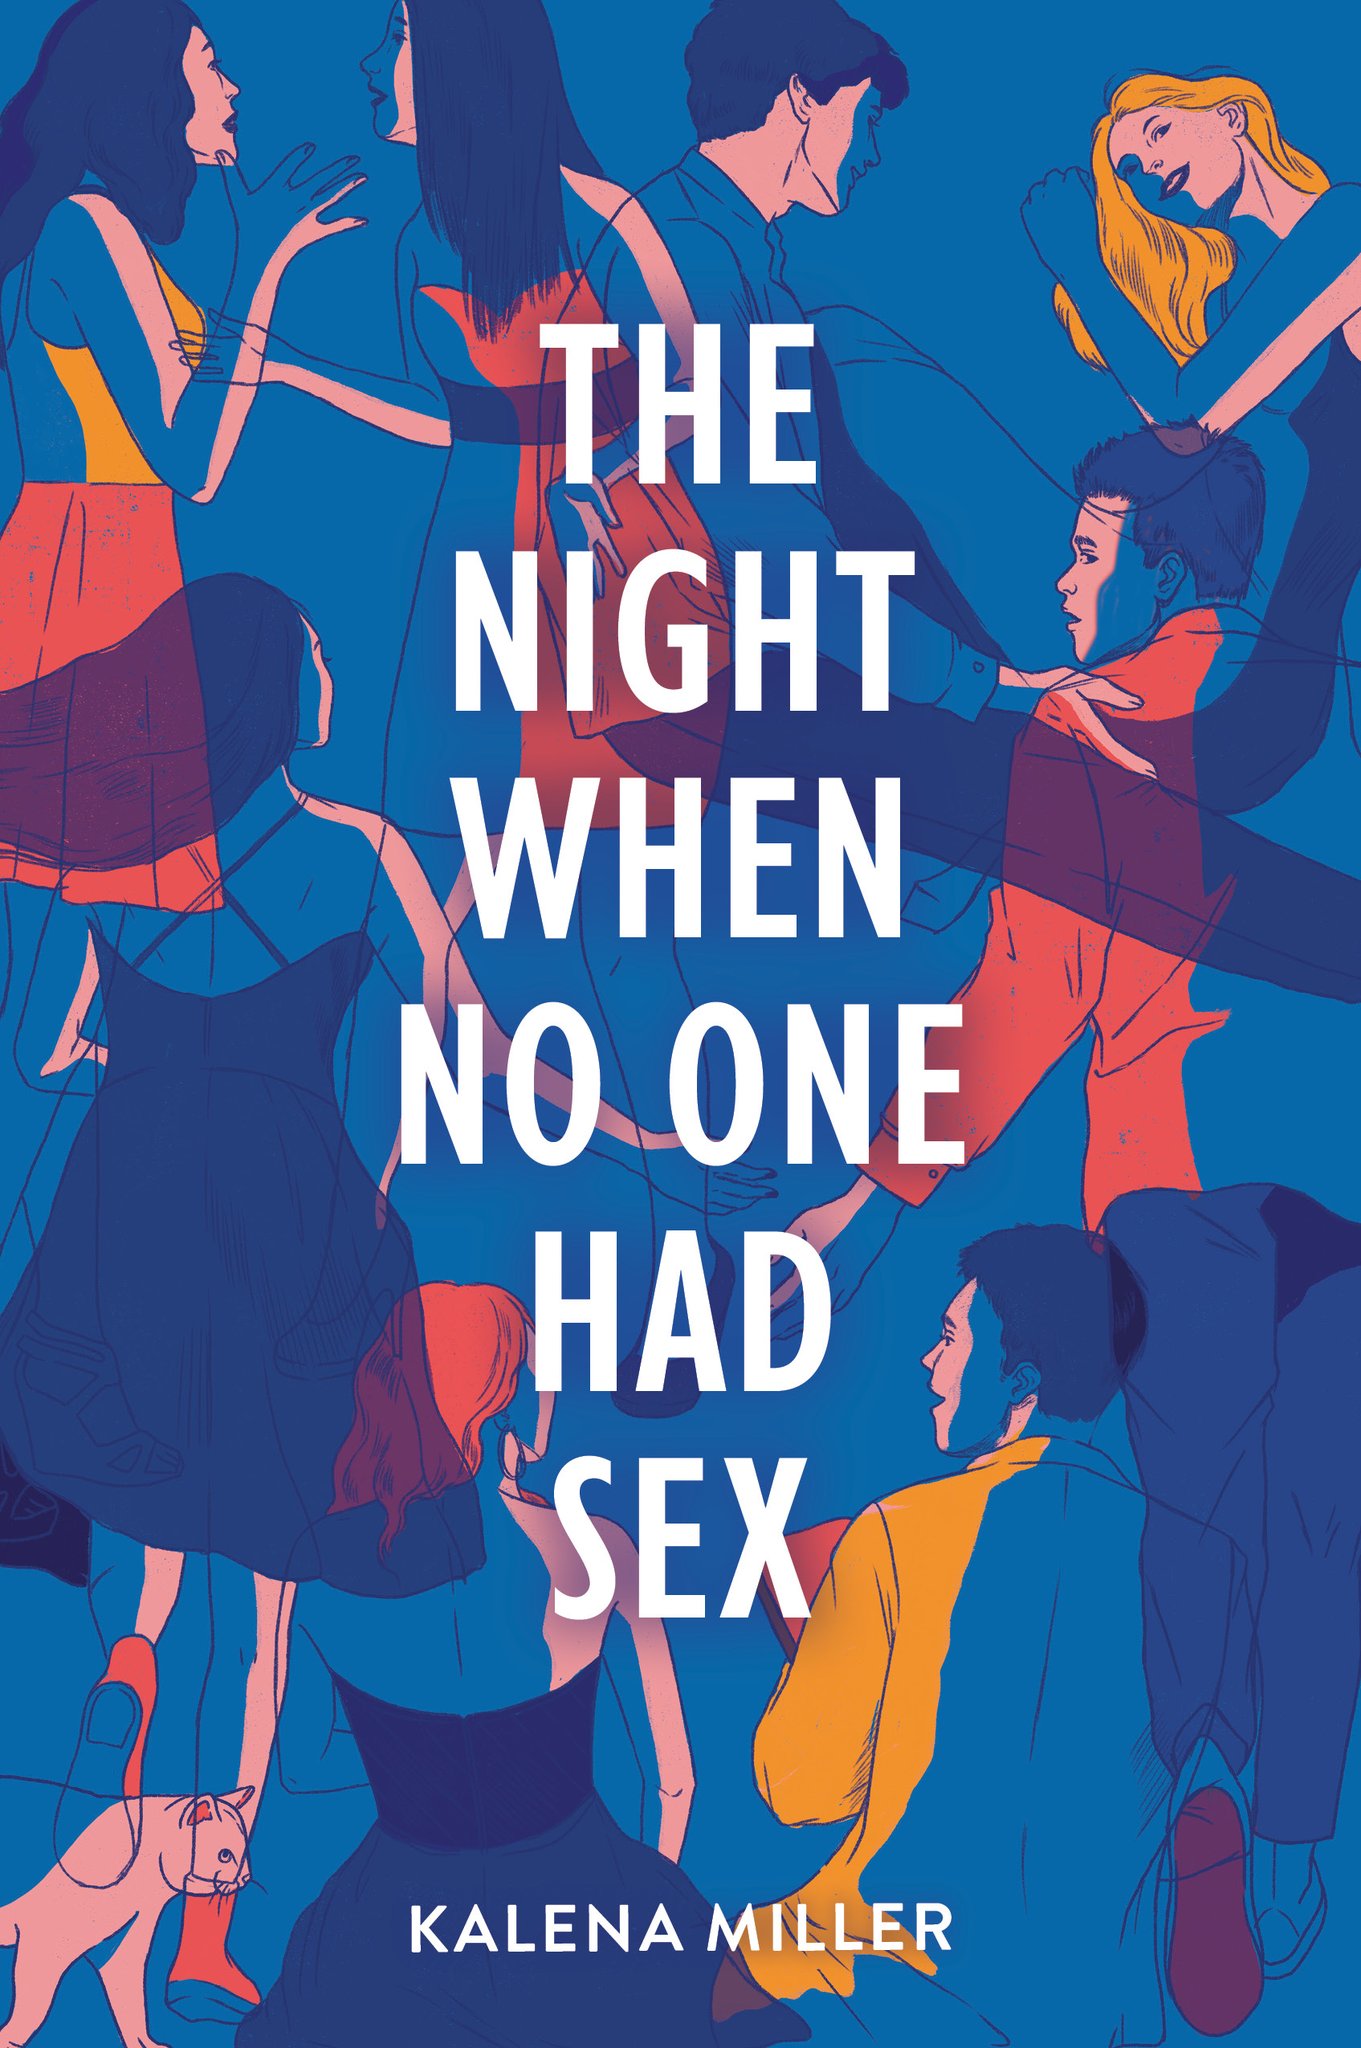 The Night When No One Has Sex by Kalena Miller